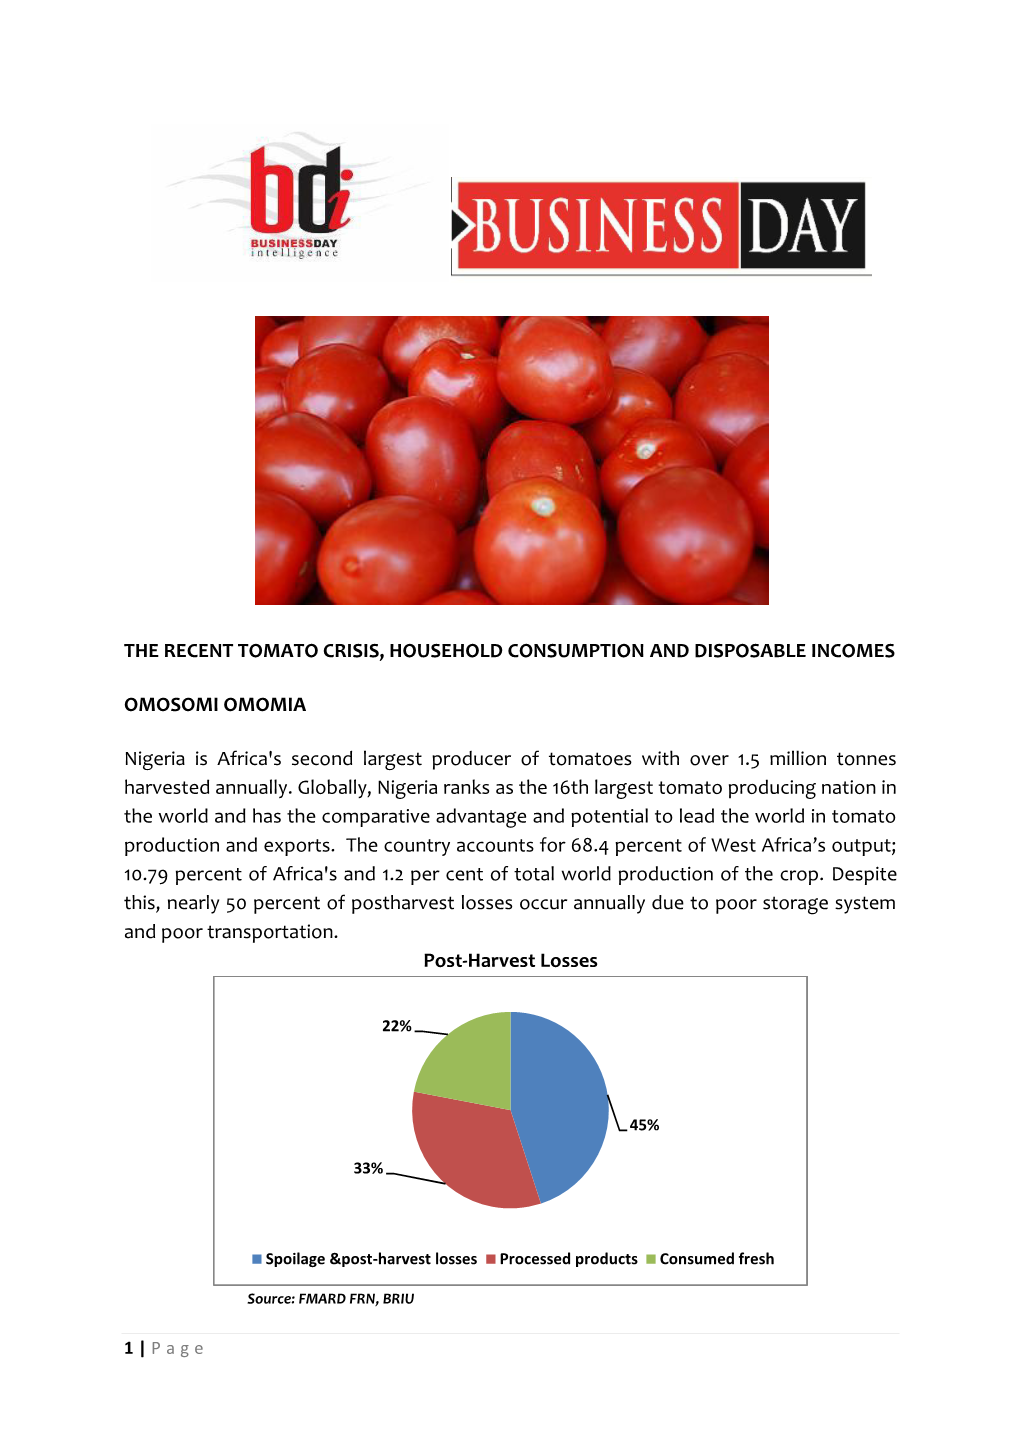 The Recent Tomato Crisis, Household Consumption and Disposable Incomes